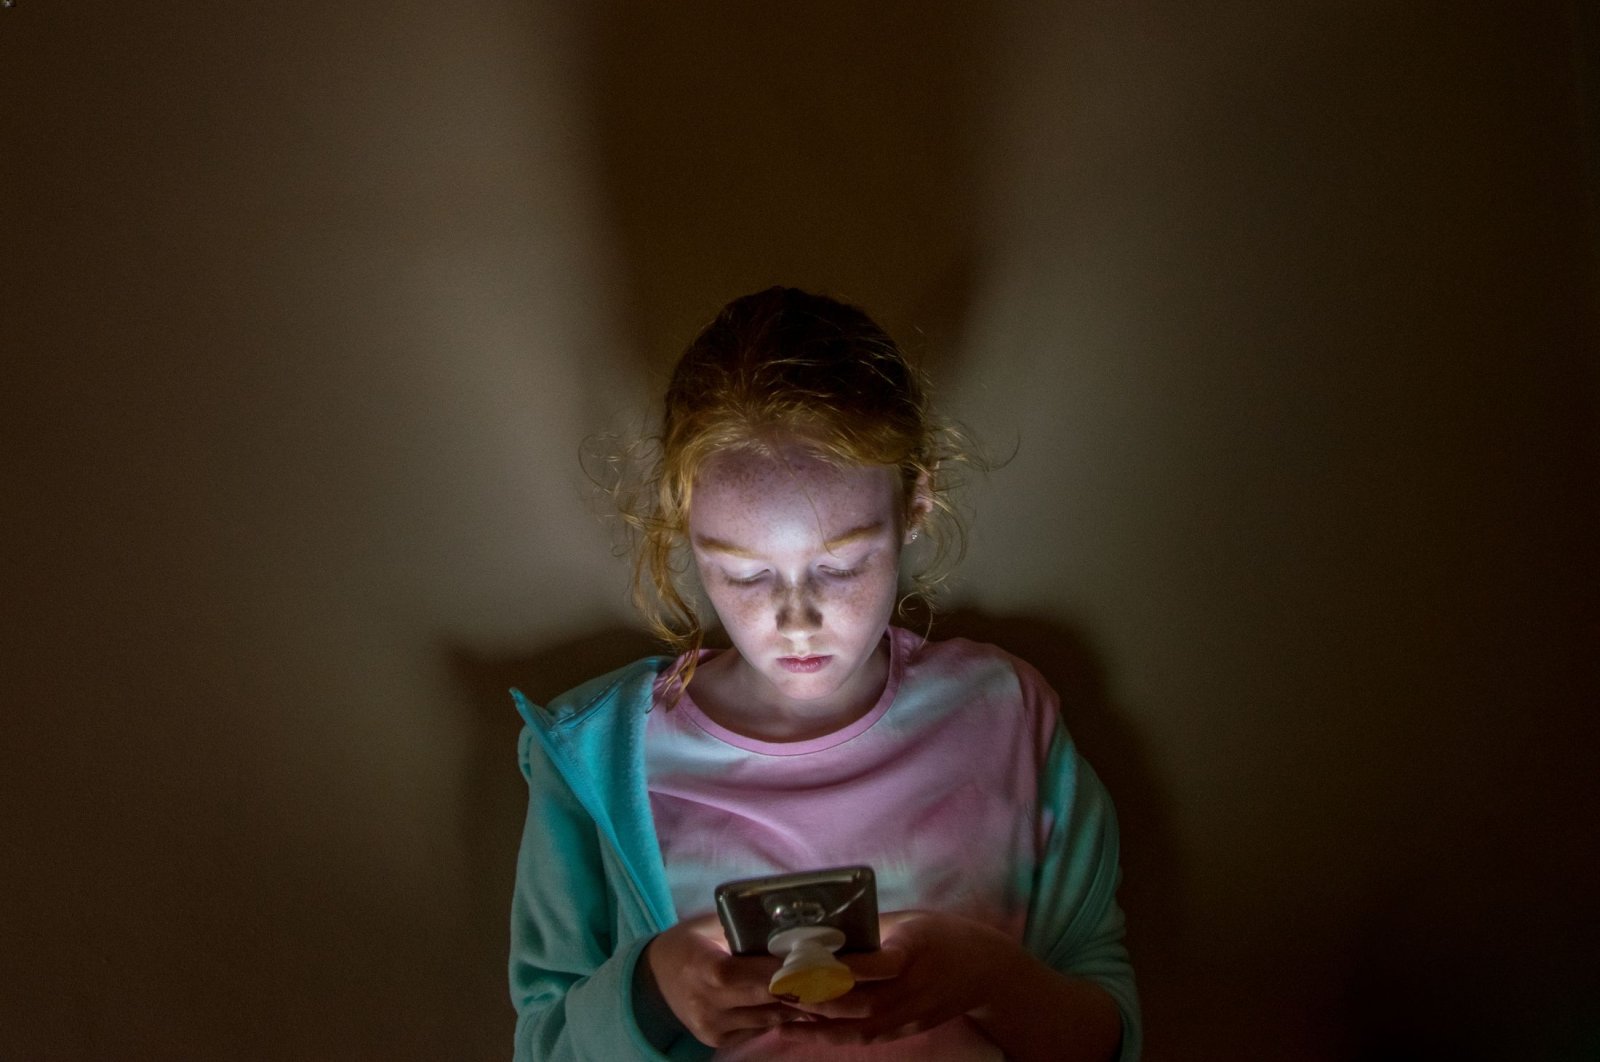 Families with poor communication skills leave children more exposed to more cyberbullying. (Getty Images Photo)